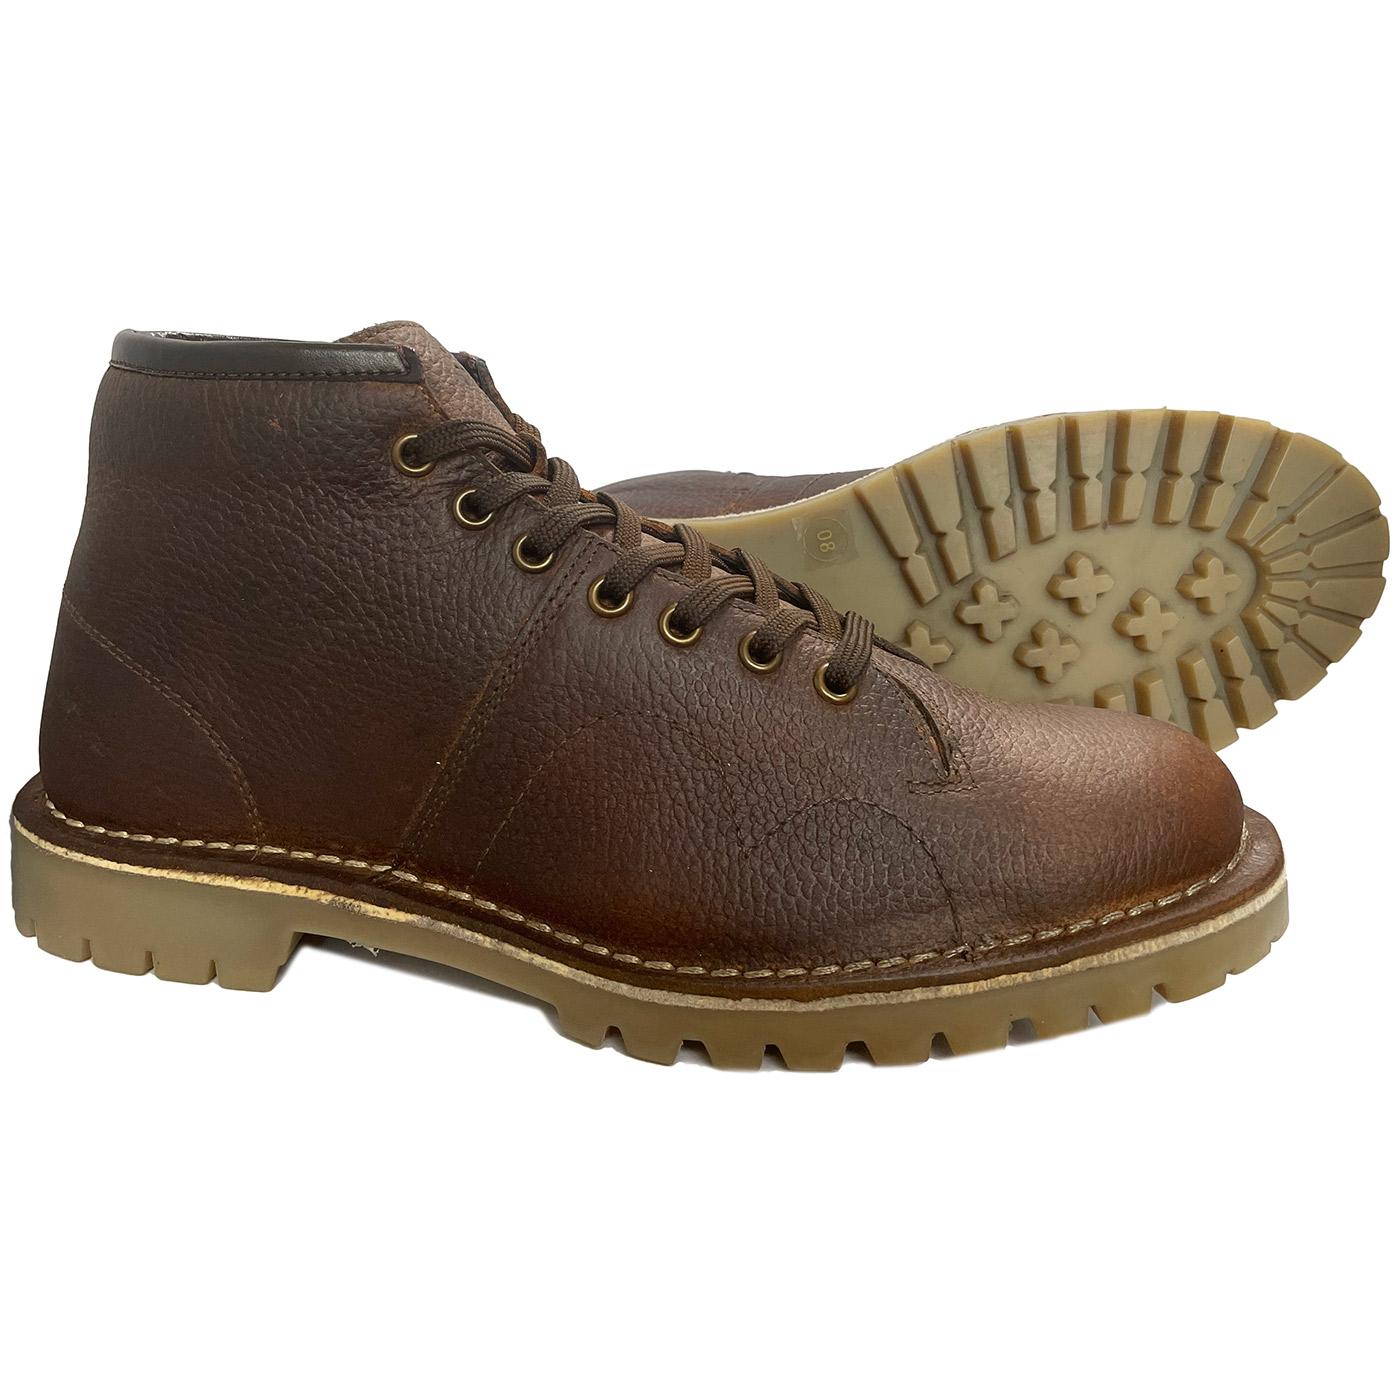 Men's Retro Mod Tumbled Leather Monkey Boots in Brown